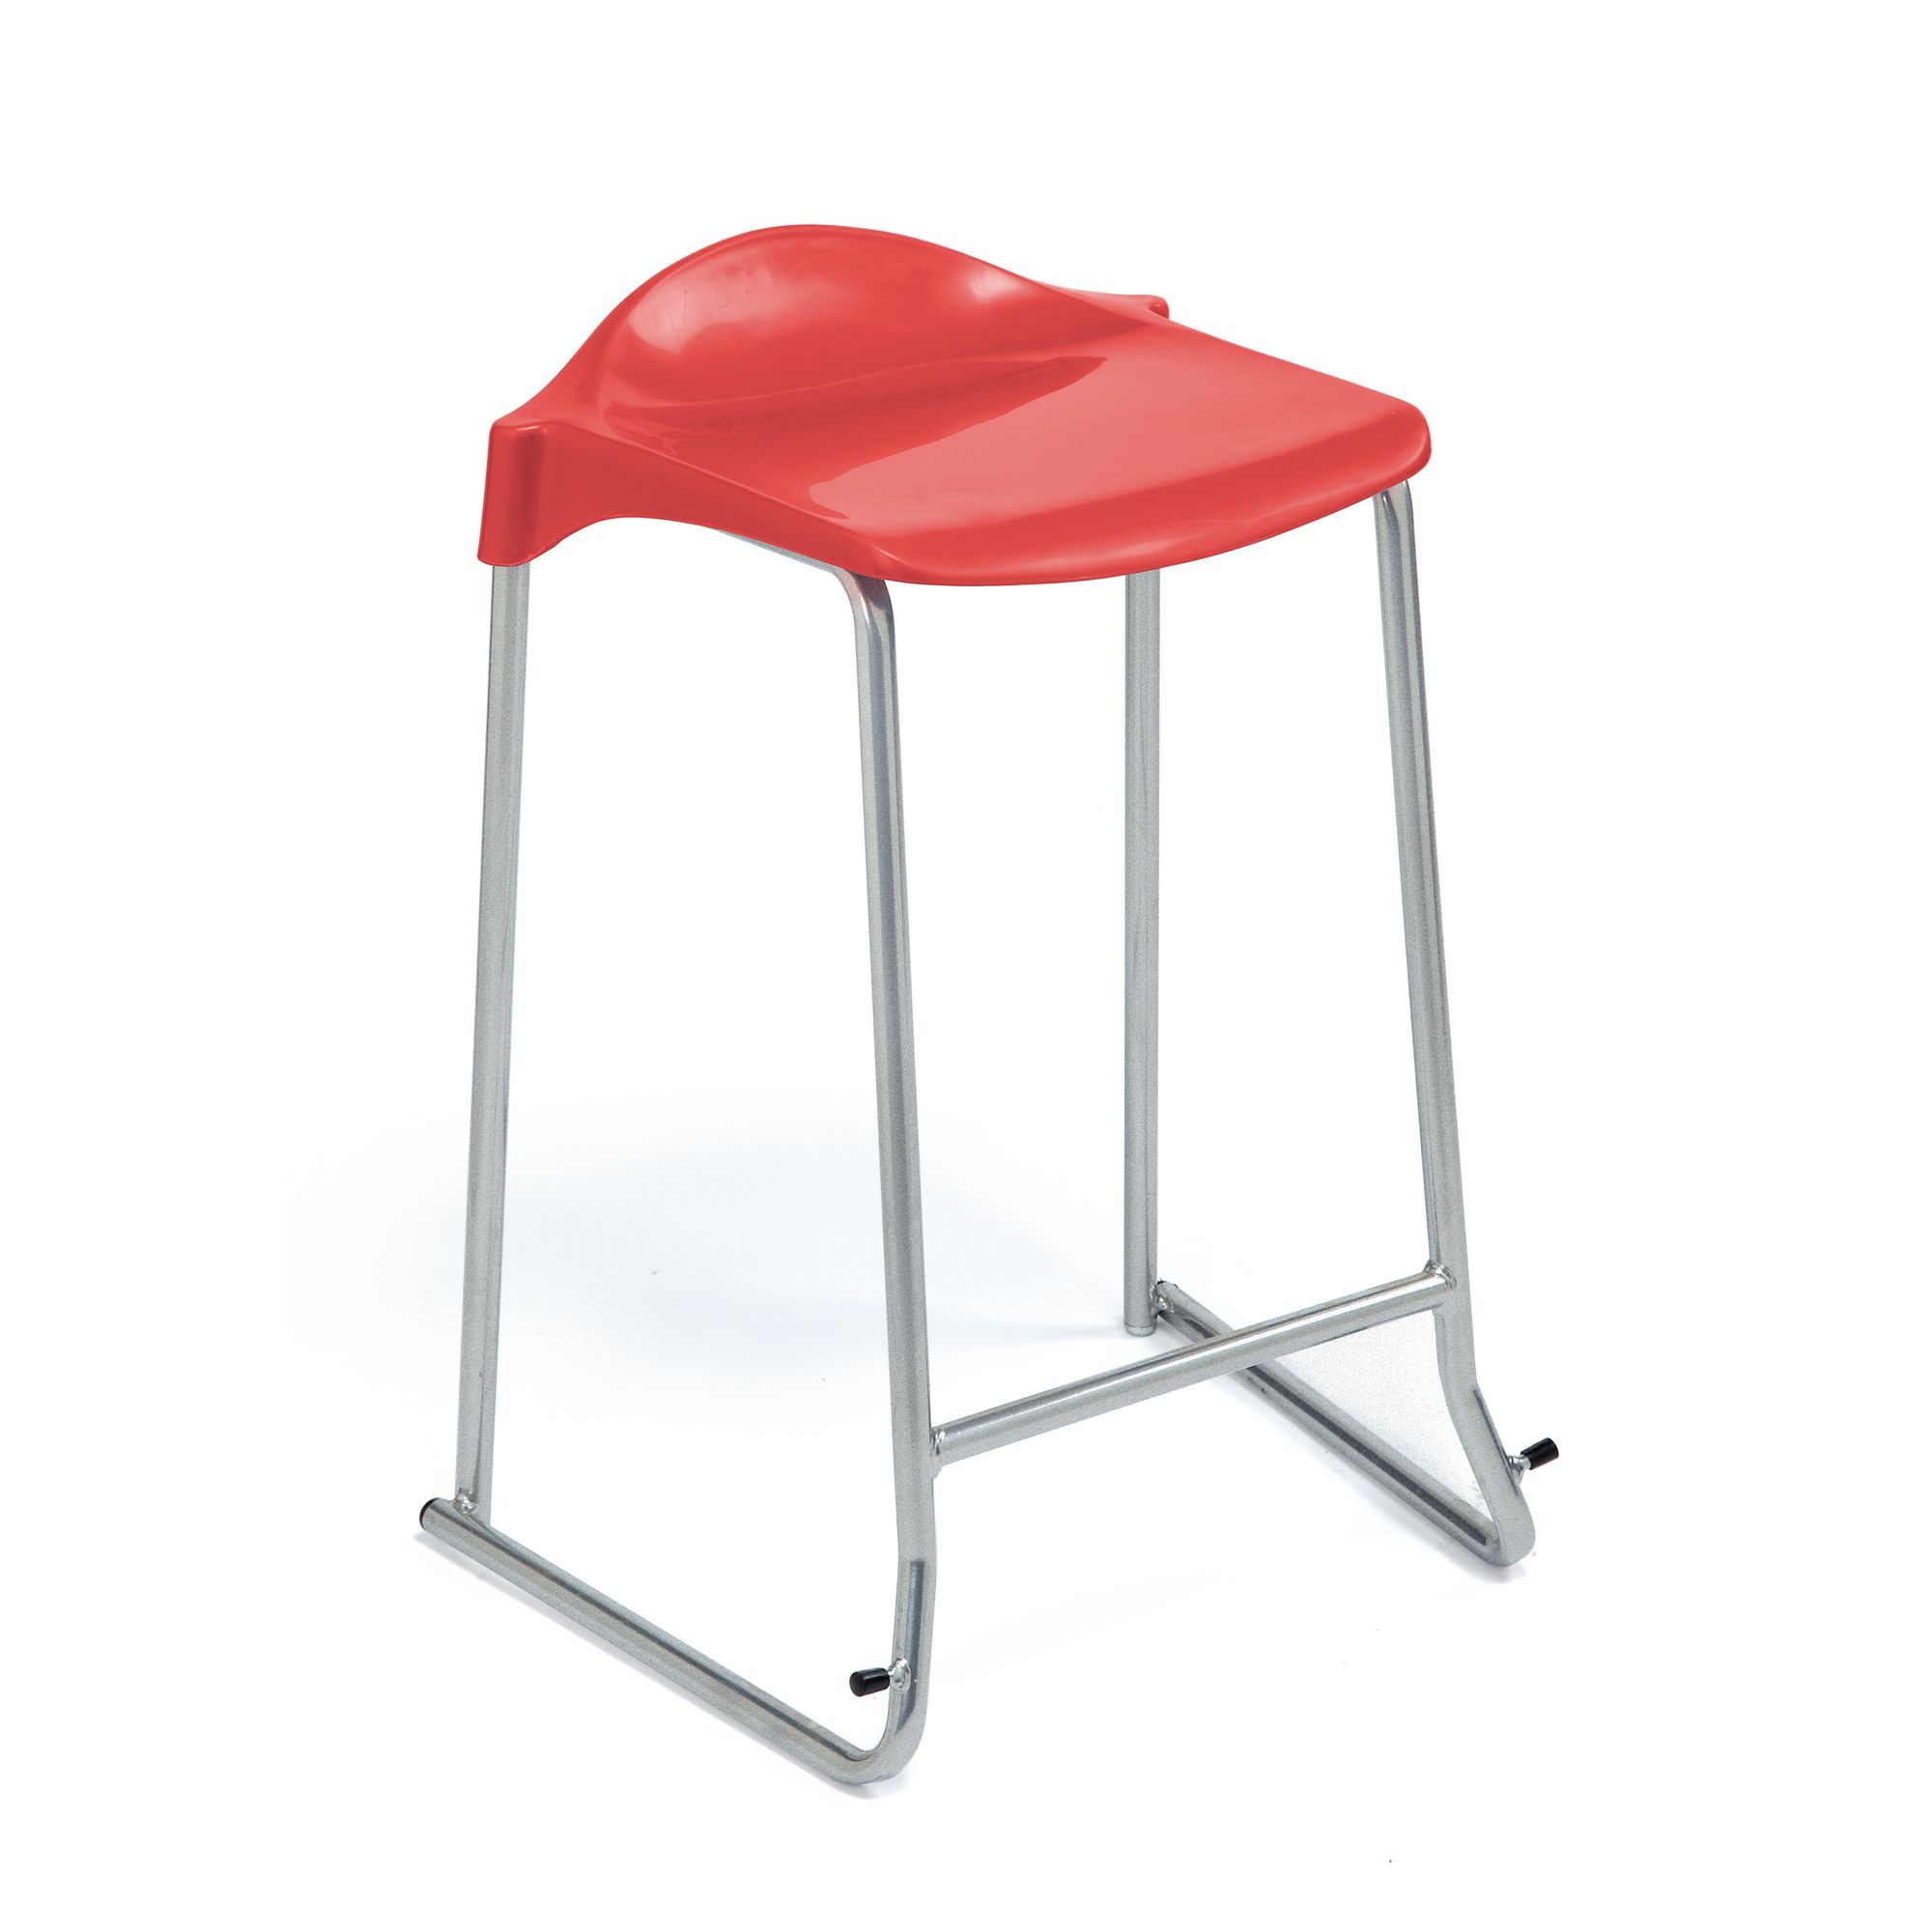 WSM Skid Base Stool - Seat height: 610mm - Red